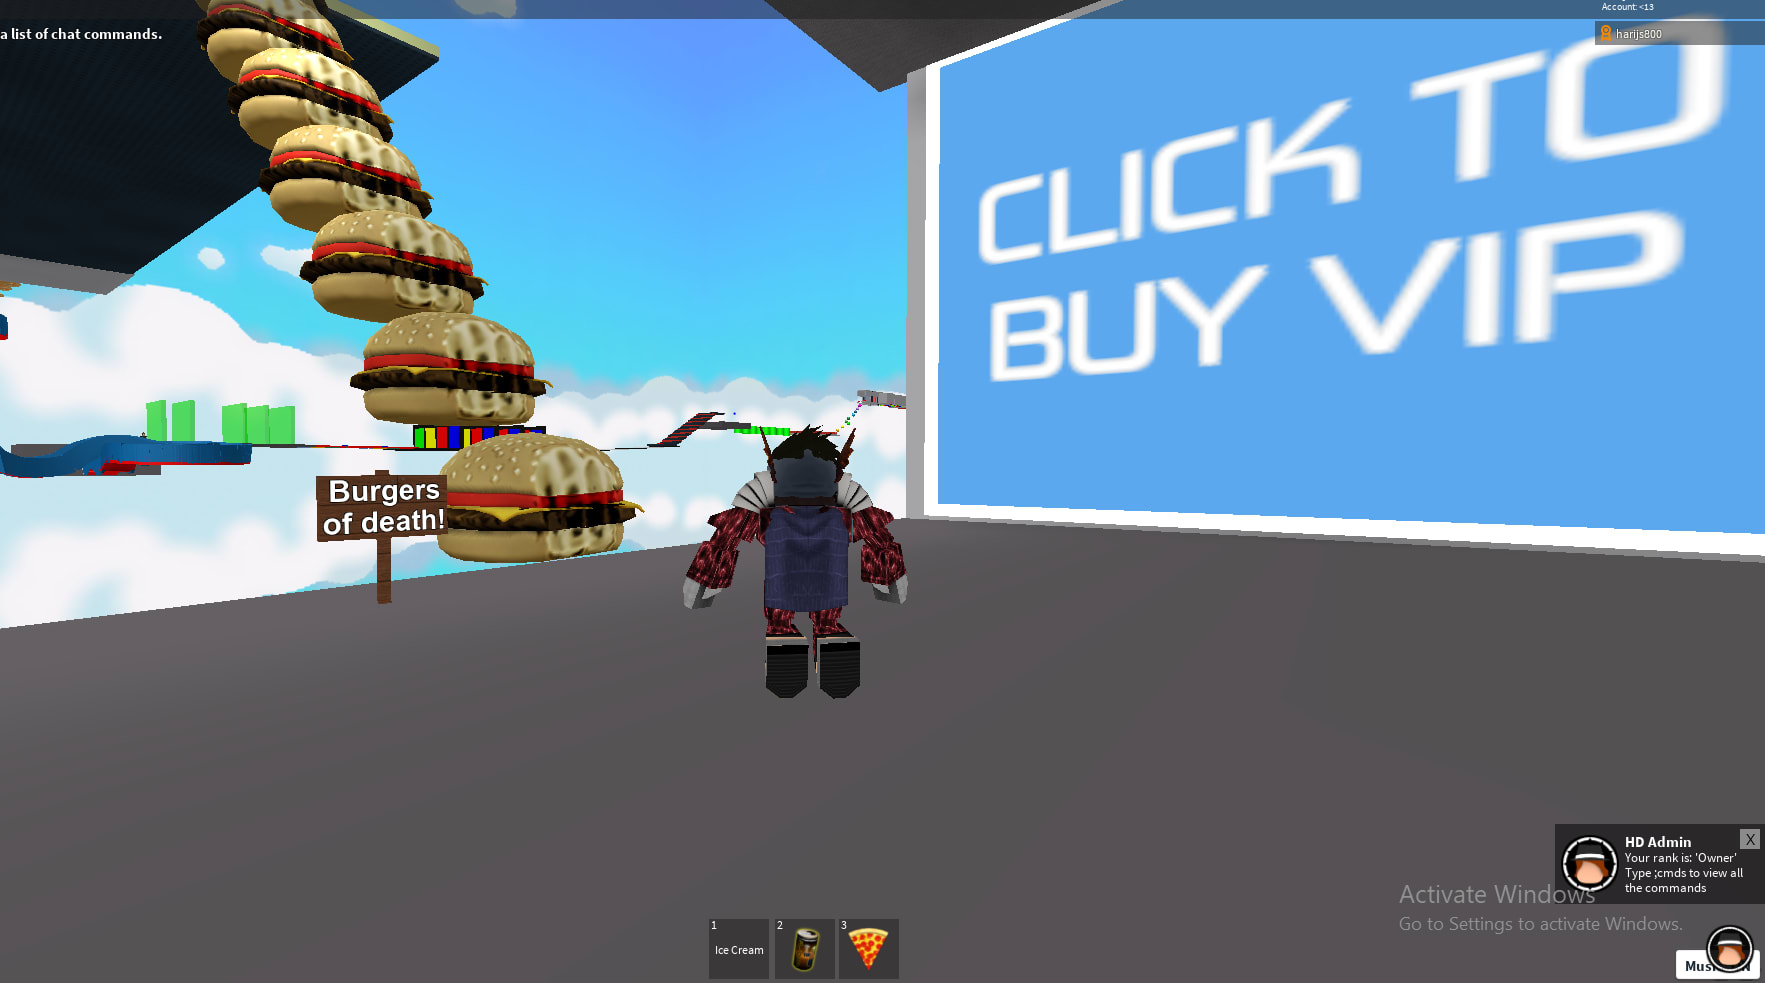 Make A Roblox Obby By Harijsbermaks - roblox hd admin images